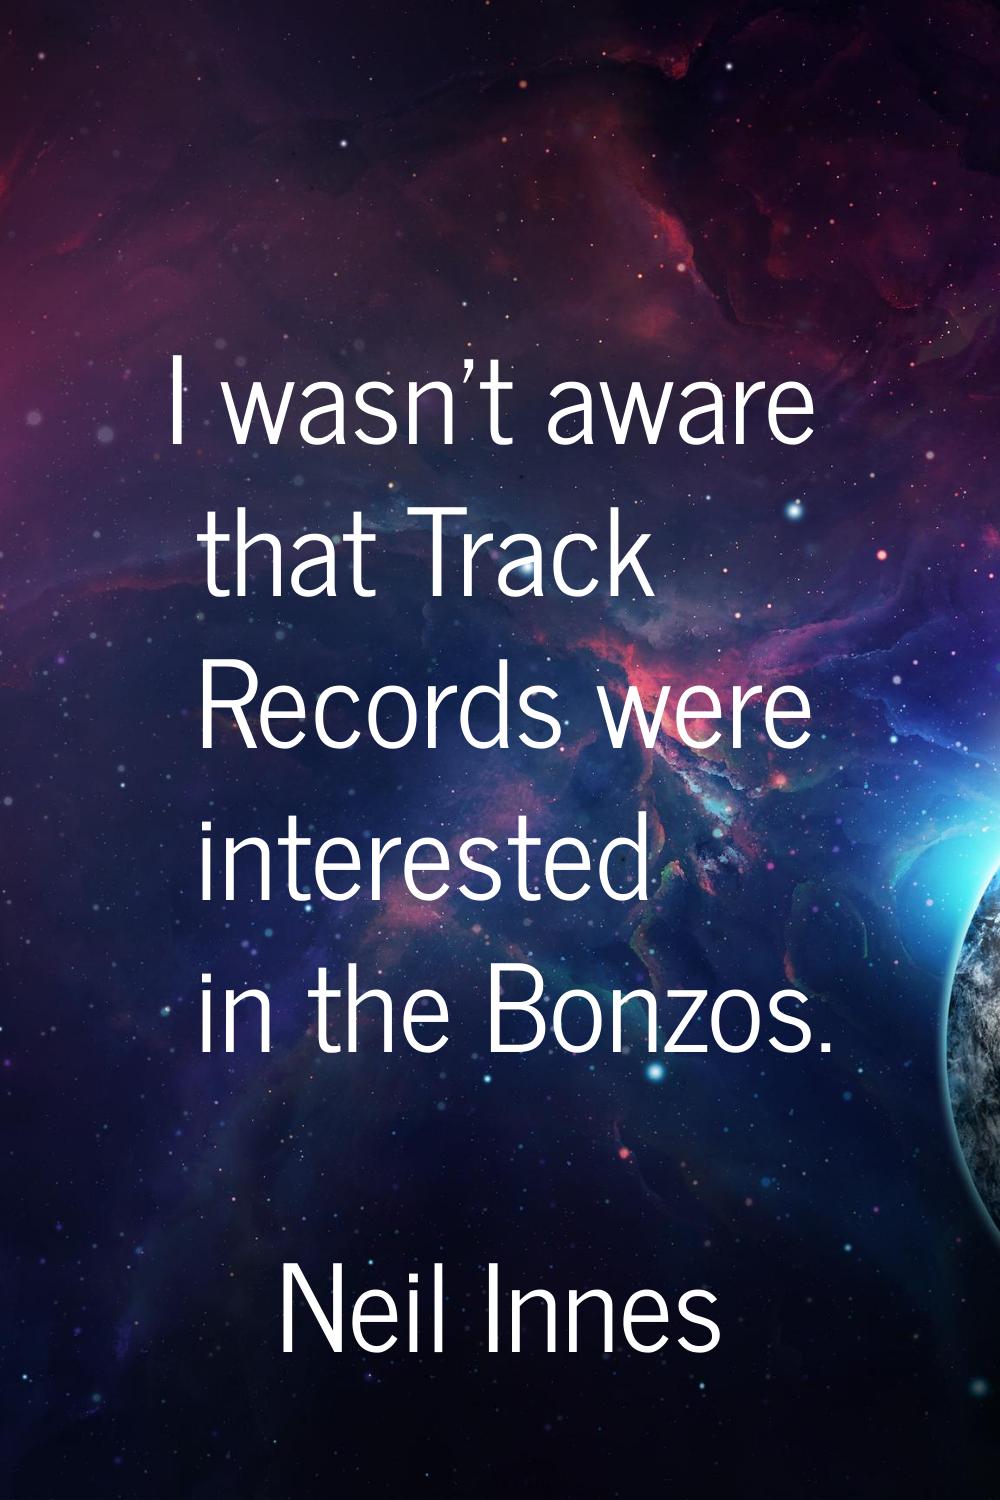 I wasn't aware that Track Records were interested in the Bonzos.